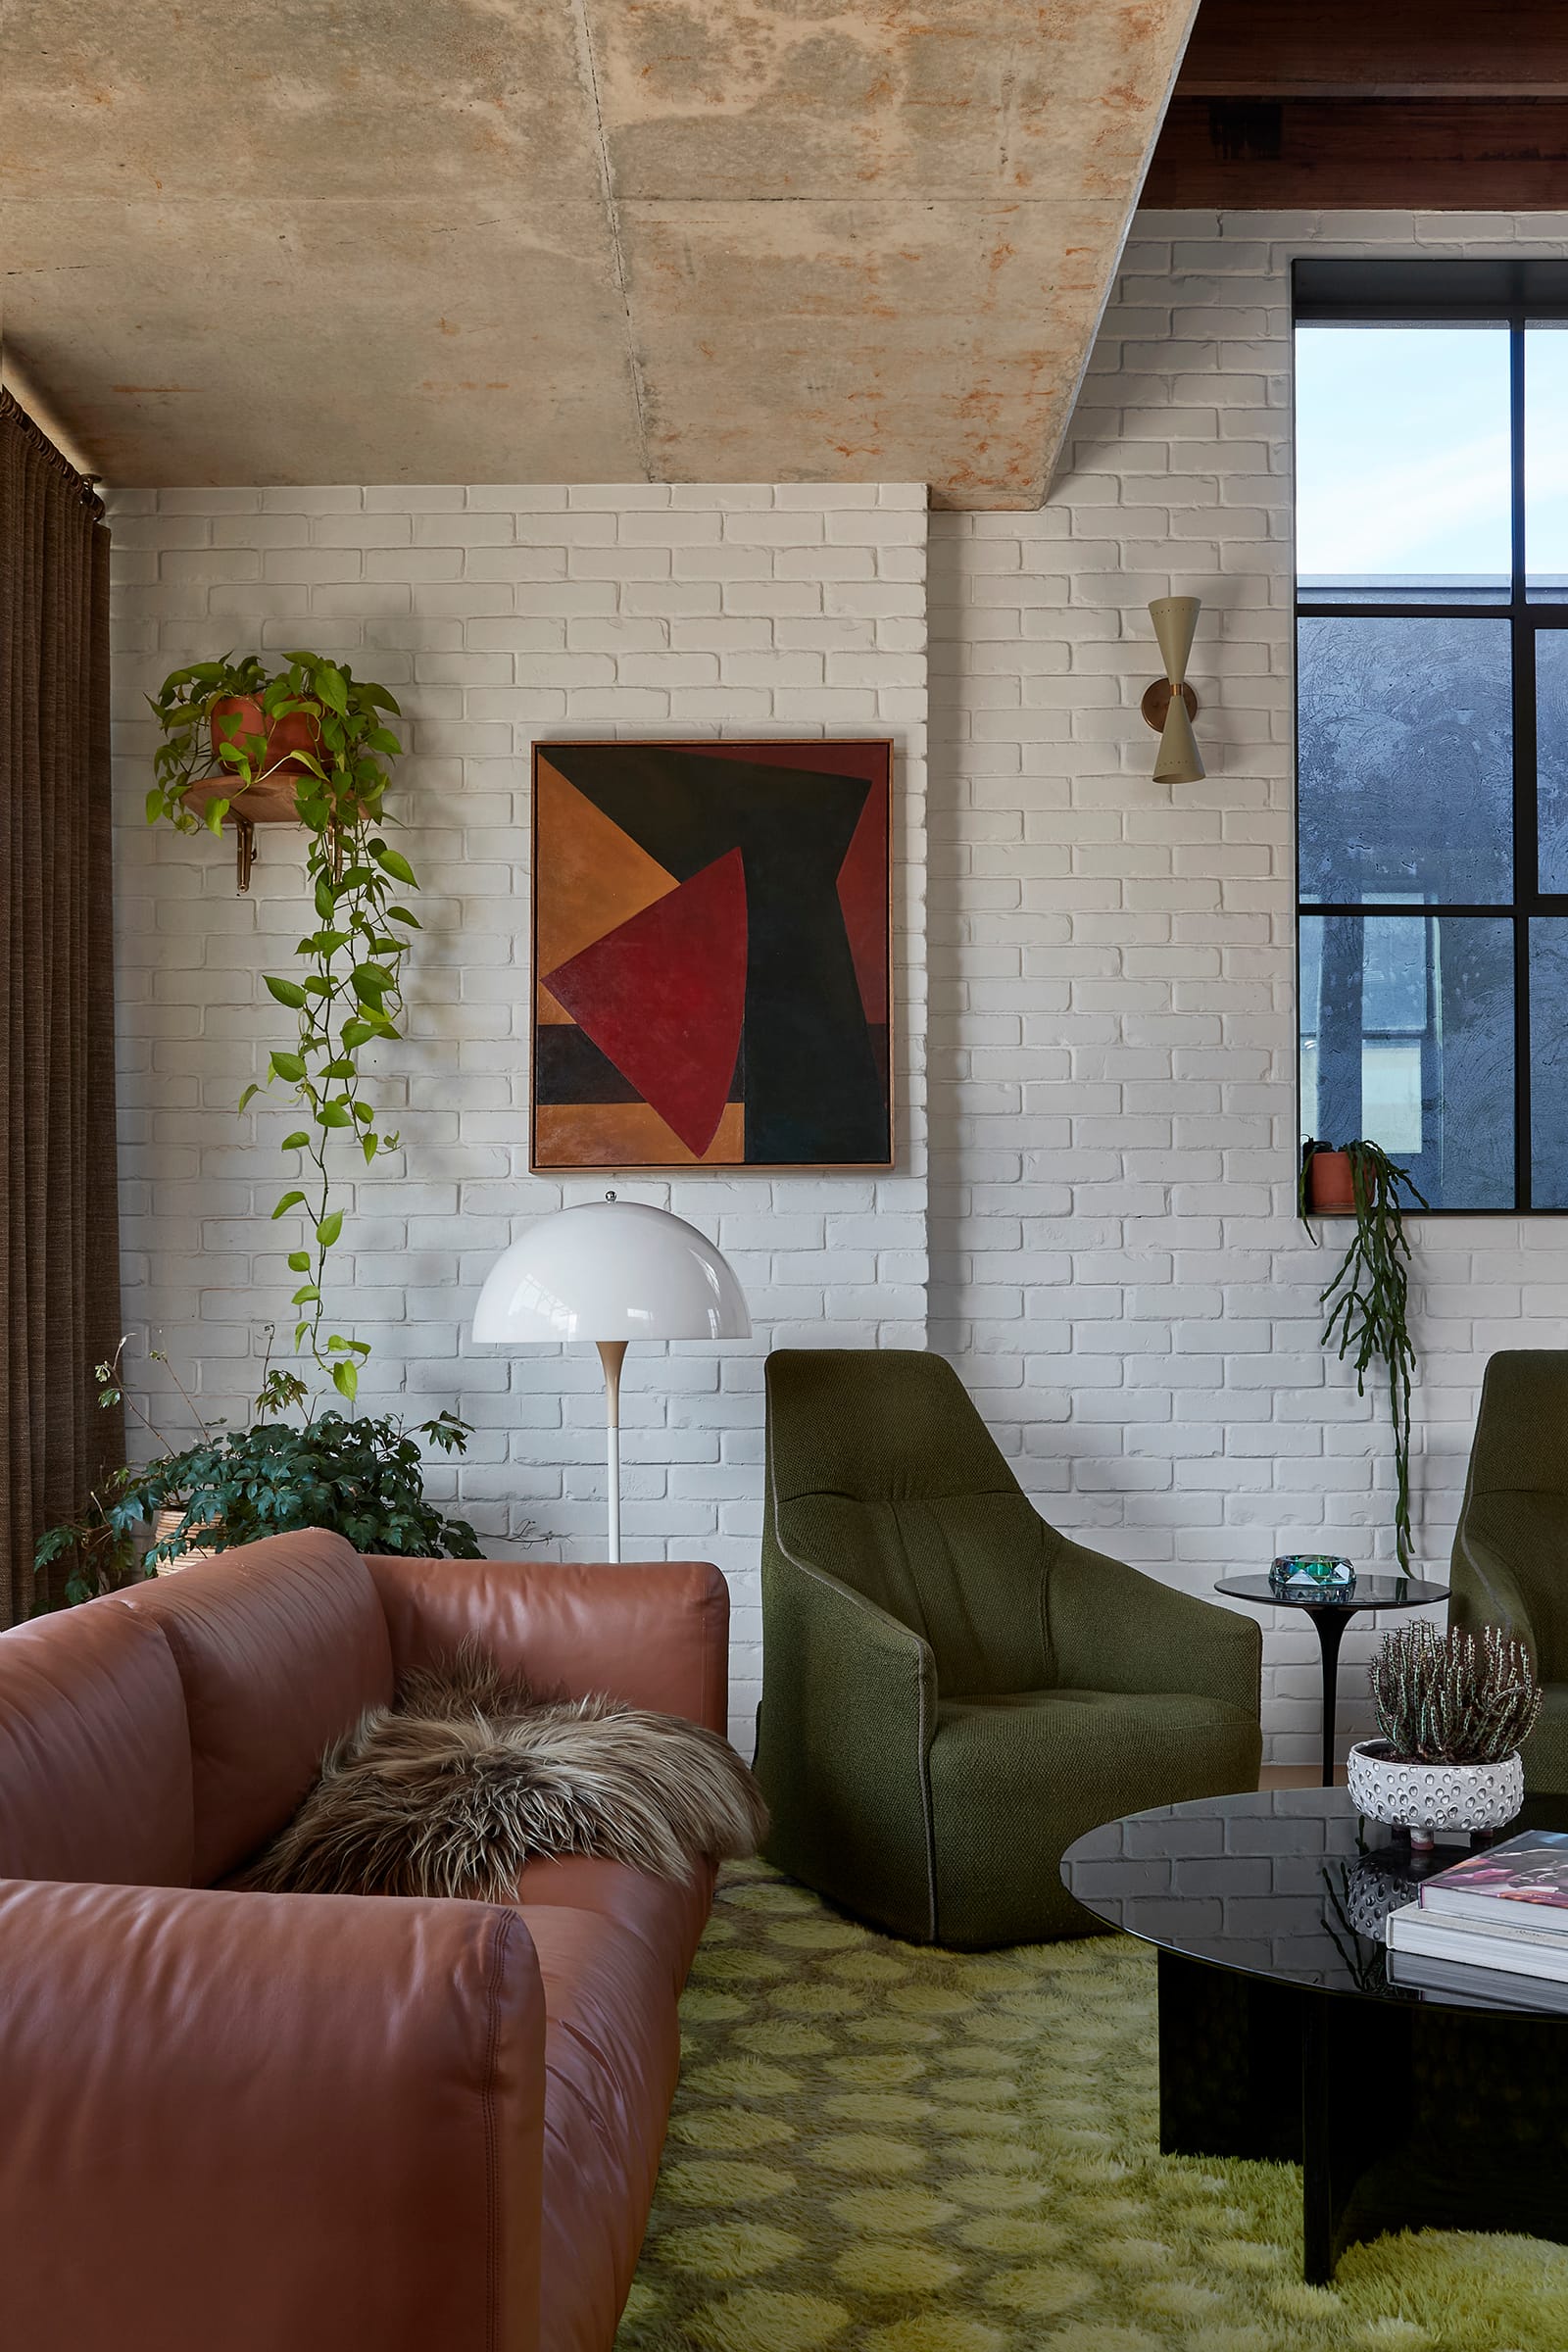 Fabrica by mcmahon and nerlich. Photography by Shannon McGrath. Living space with green rug, green armchairs and brown leather couch. Eclectic furnishings. White brick wall.